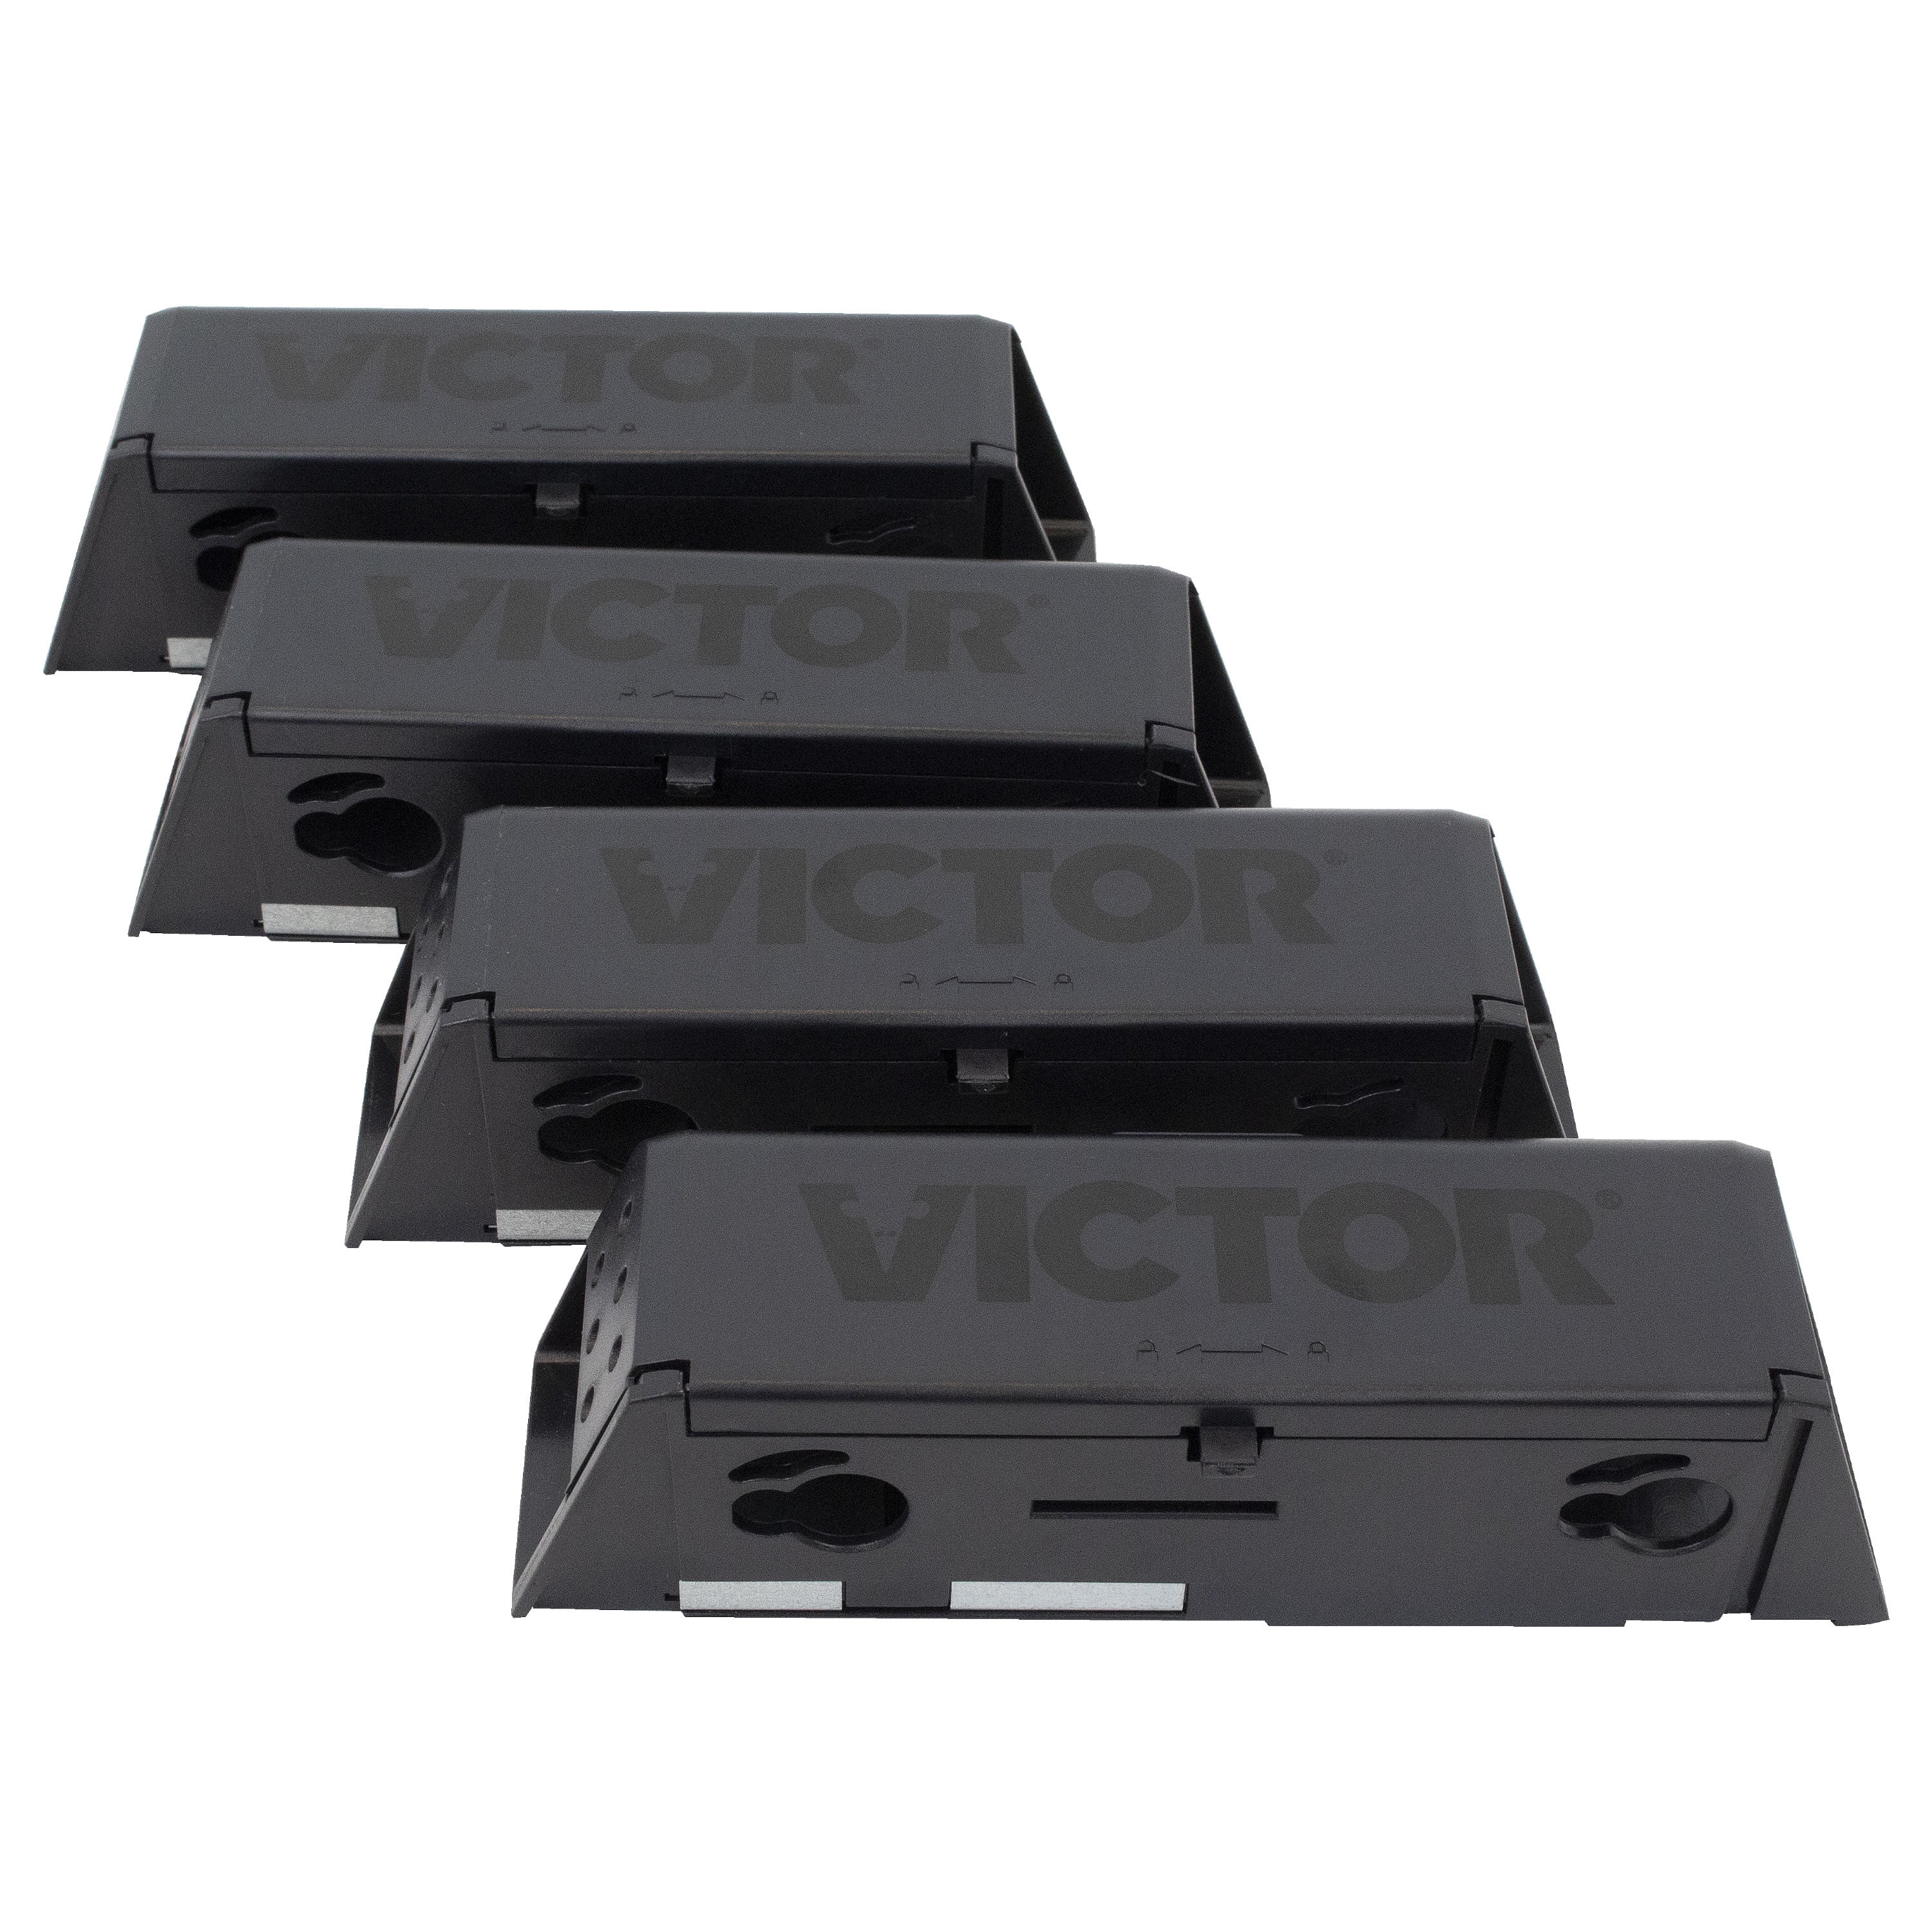 4-PACK Victor Metal Pedal Mouse Trap New Indoor/Outdoor Disposable Reusable  Pest